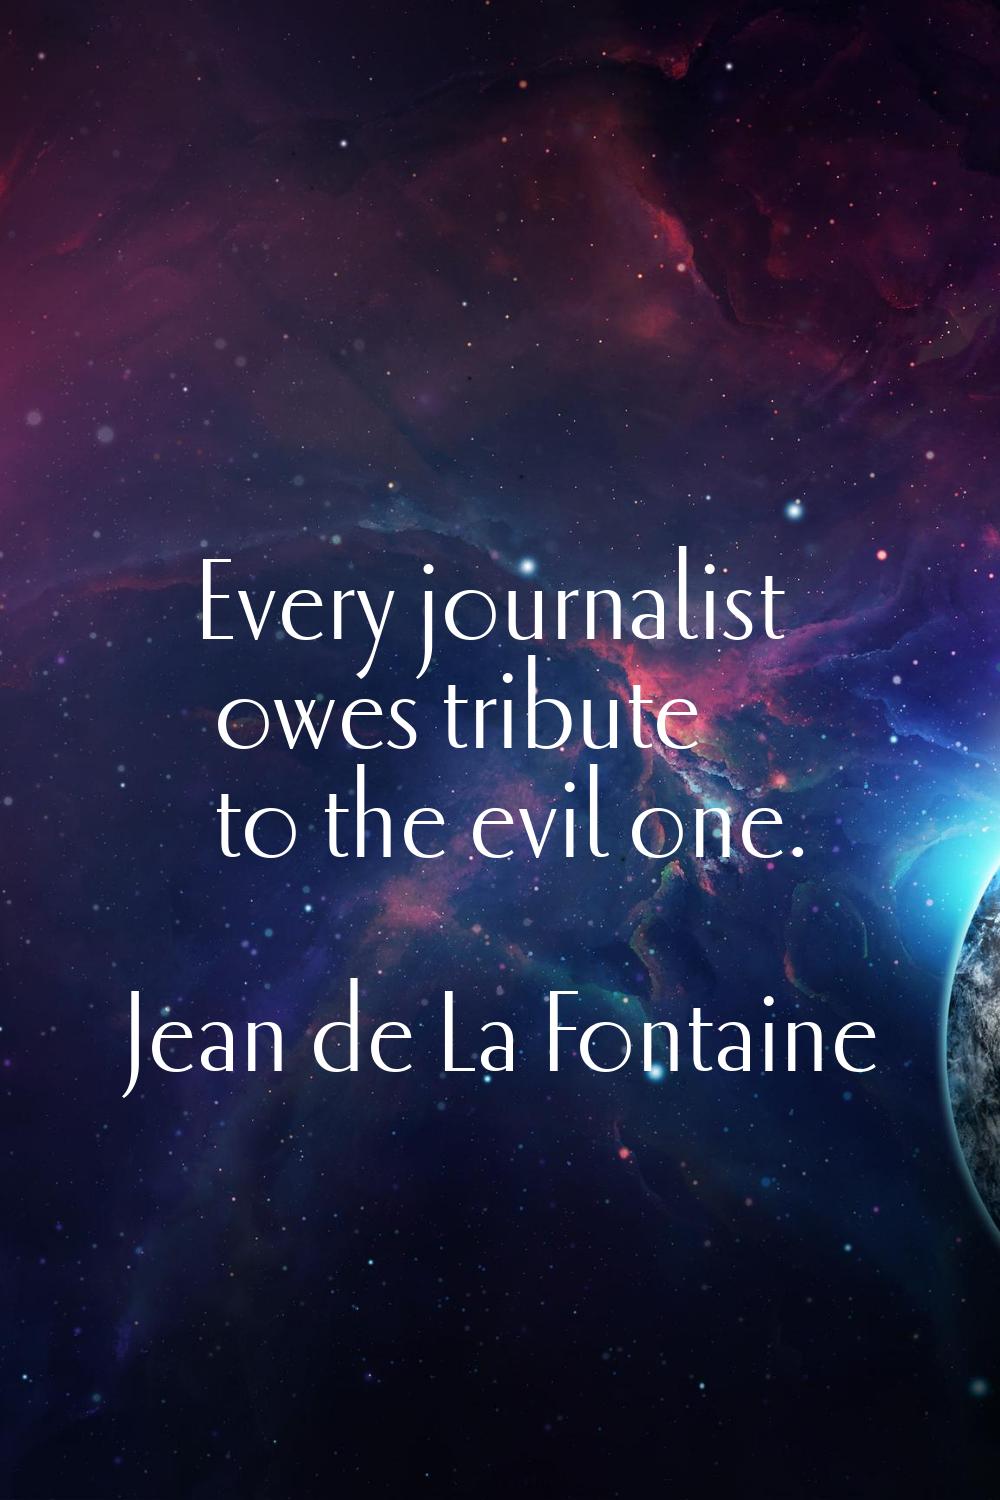 Every journalist owes tribute to the evil one.